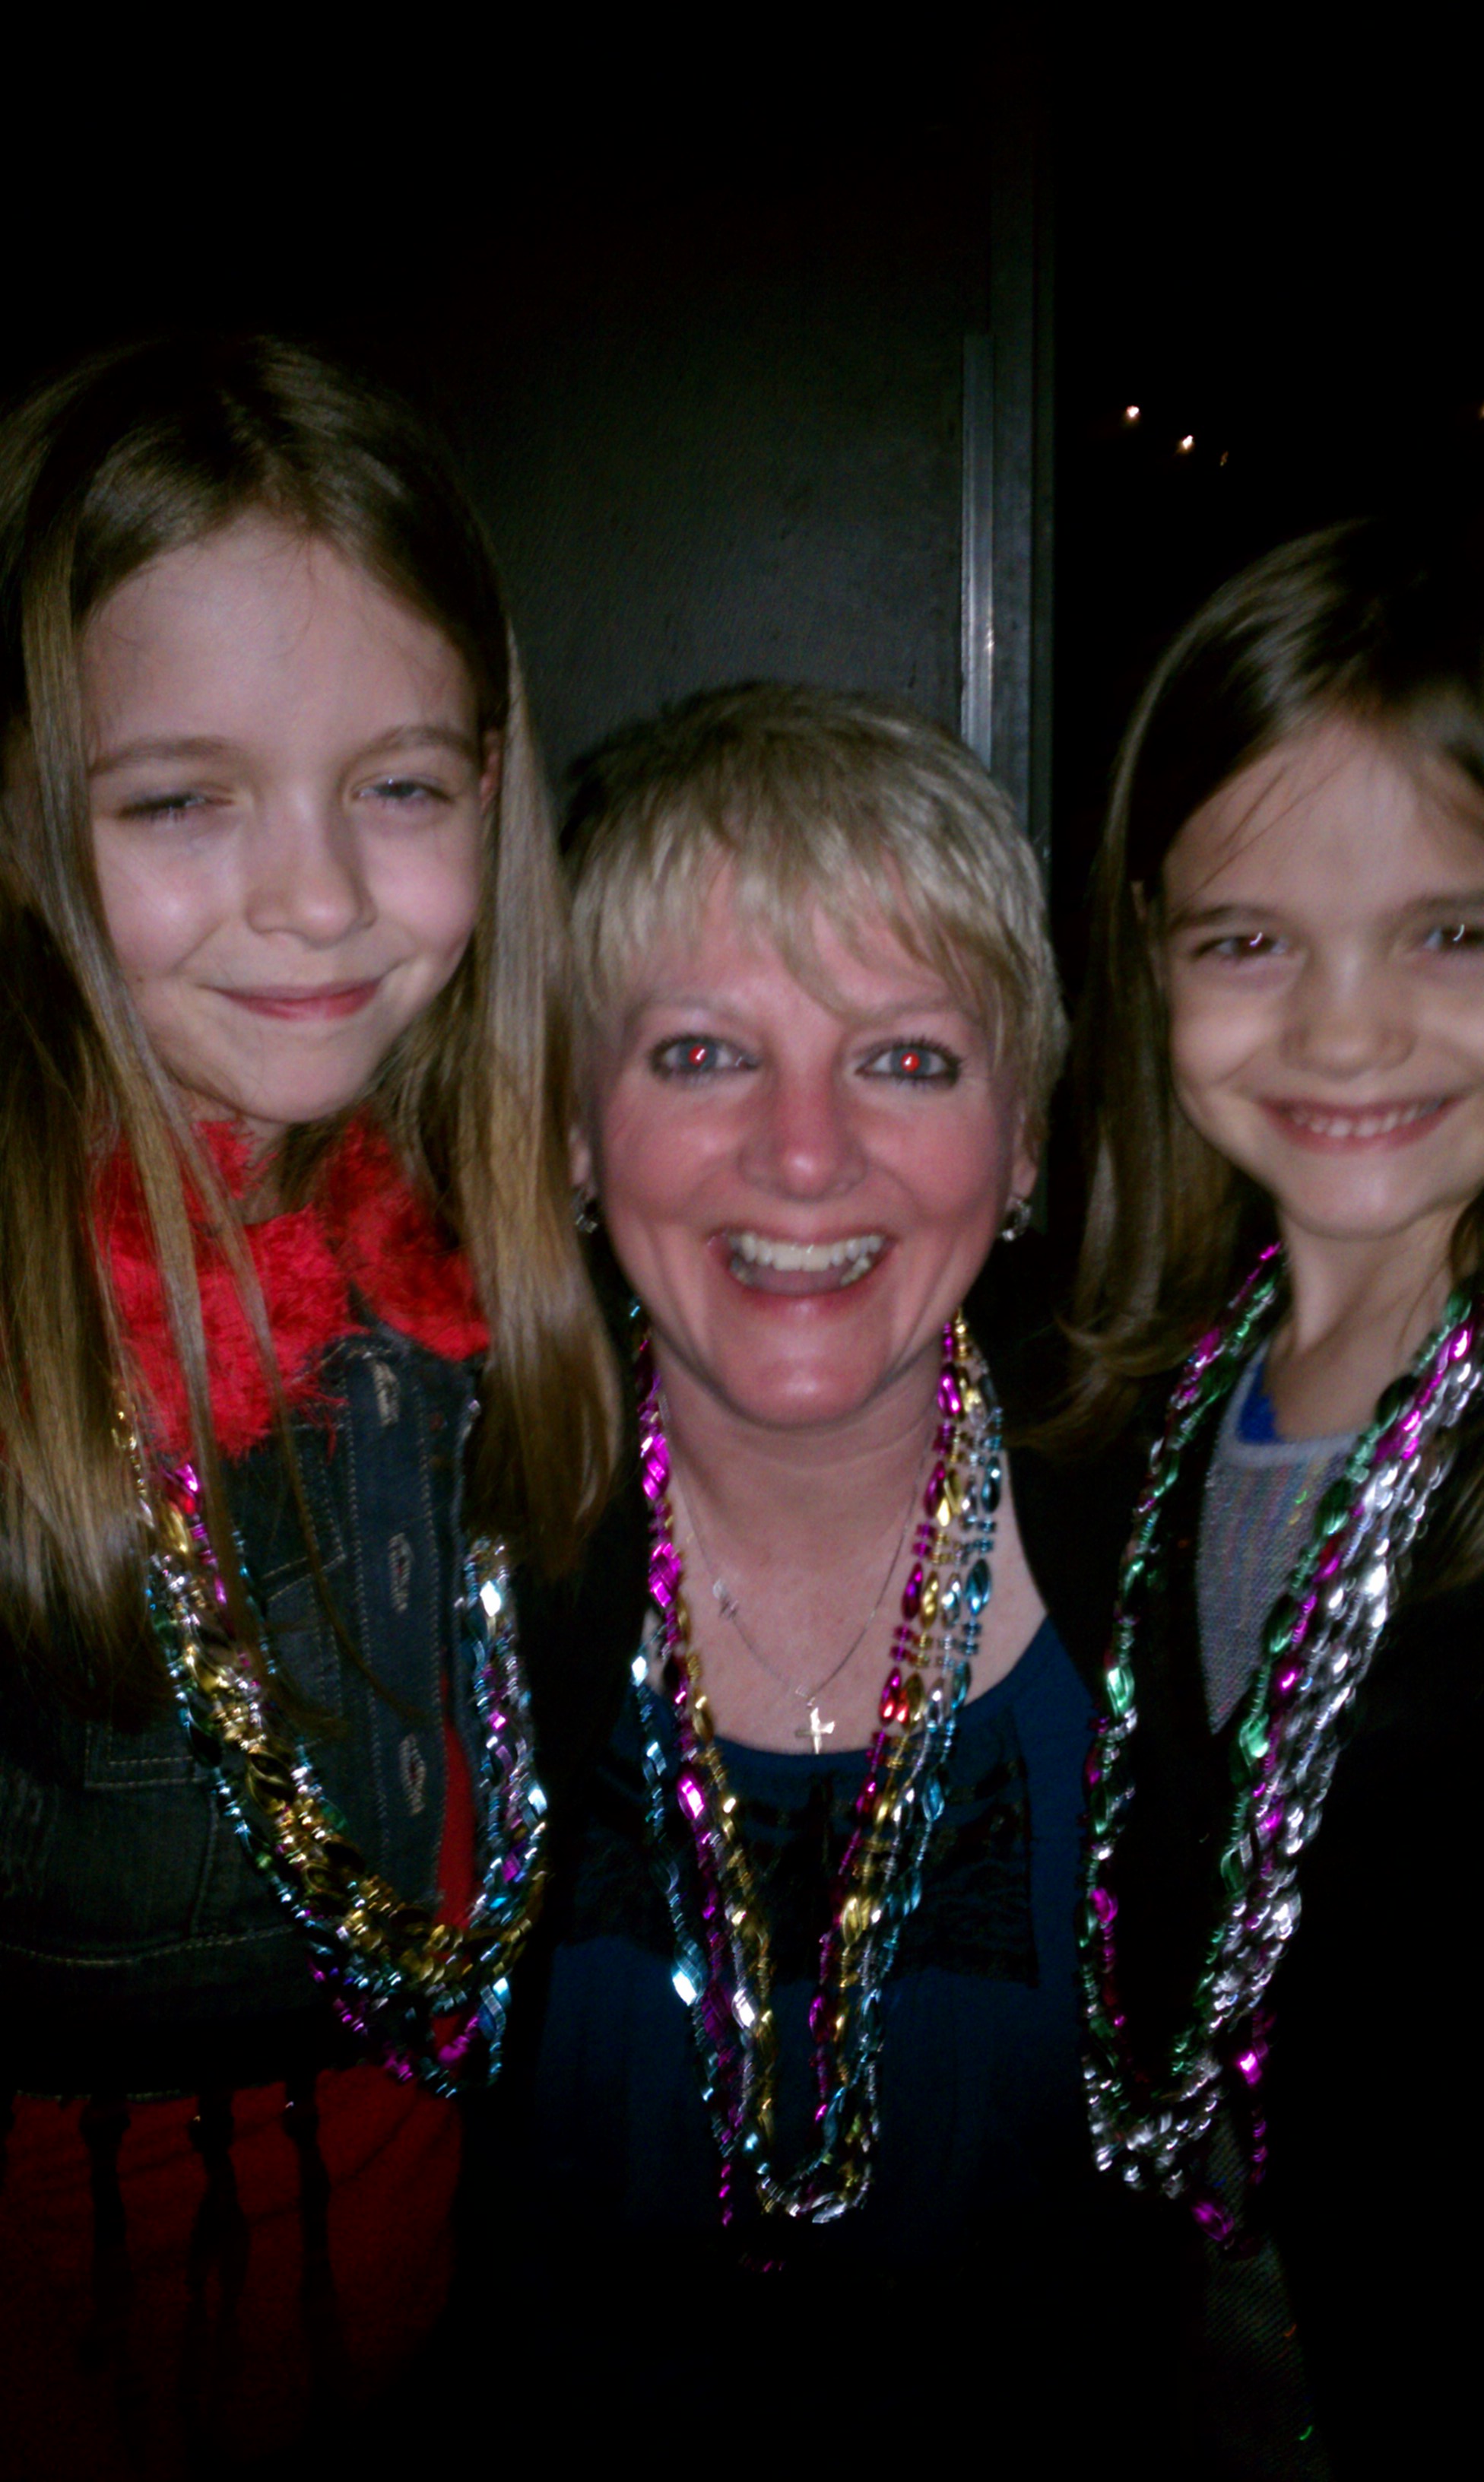 Hannah and sister/actress Mykayla with Alison Arngrim